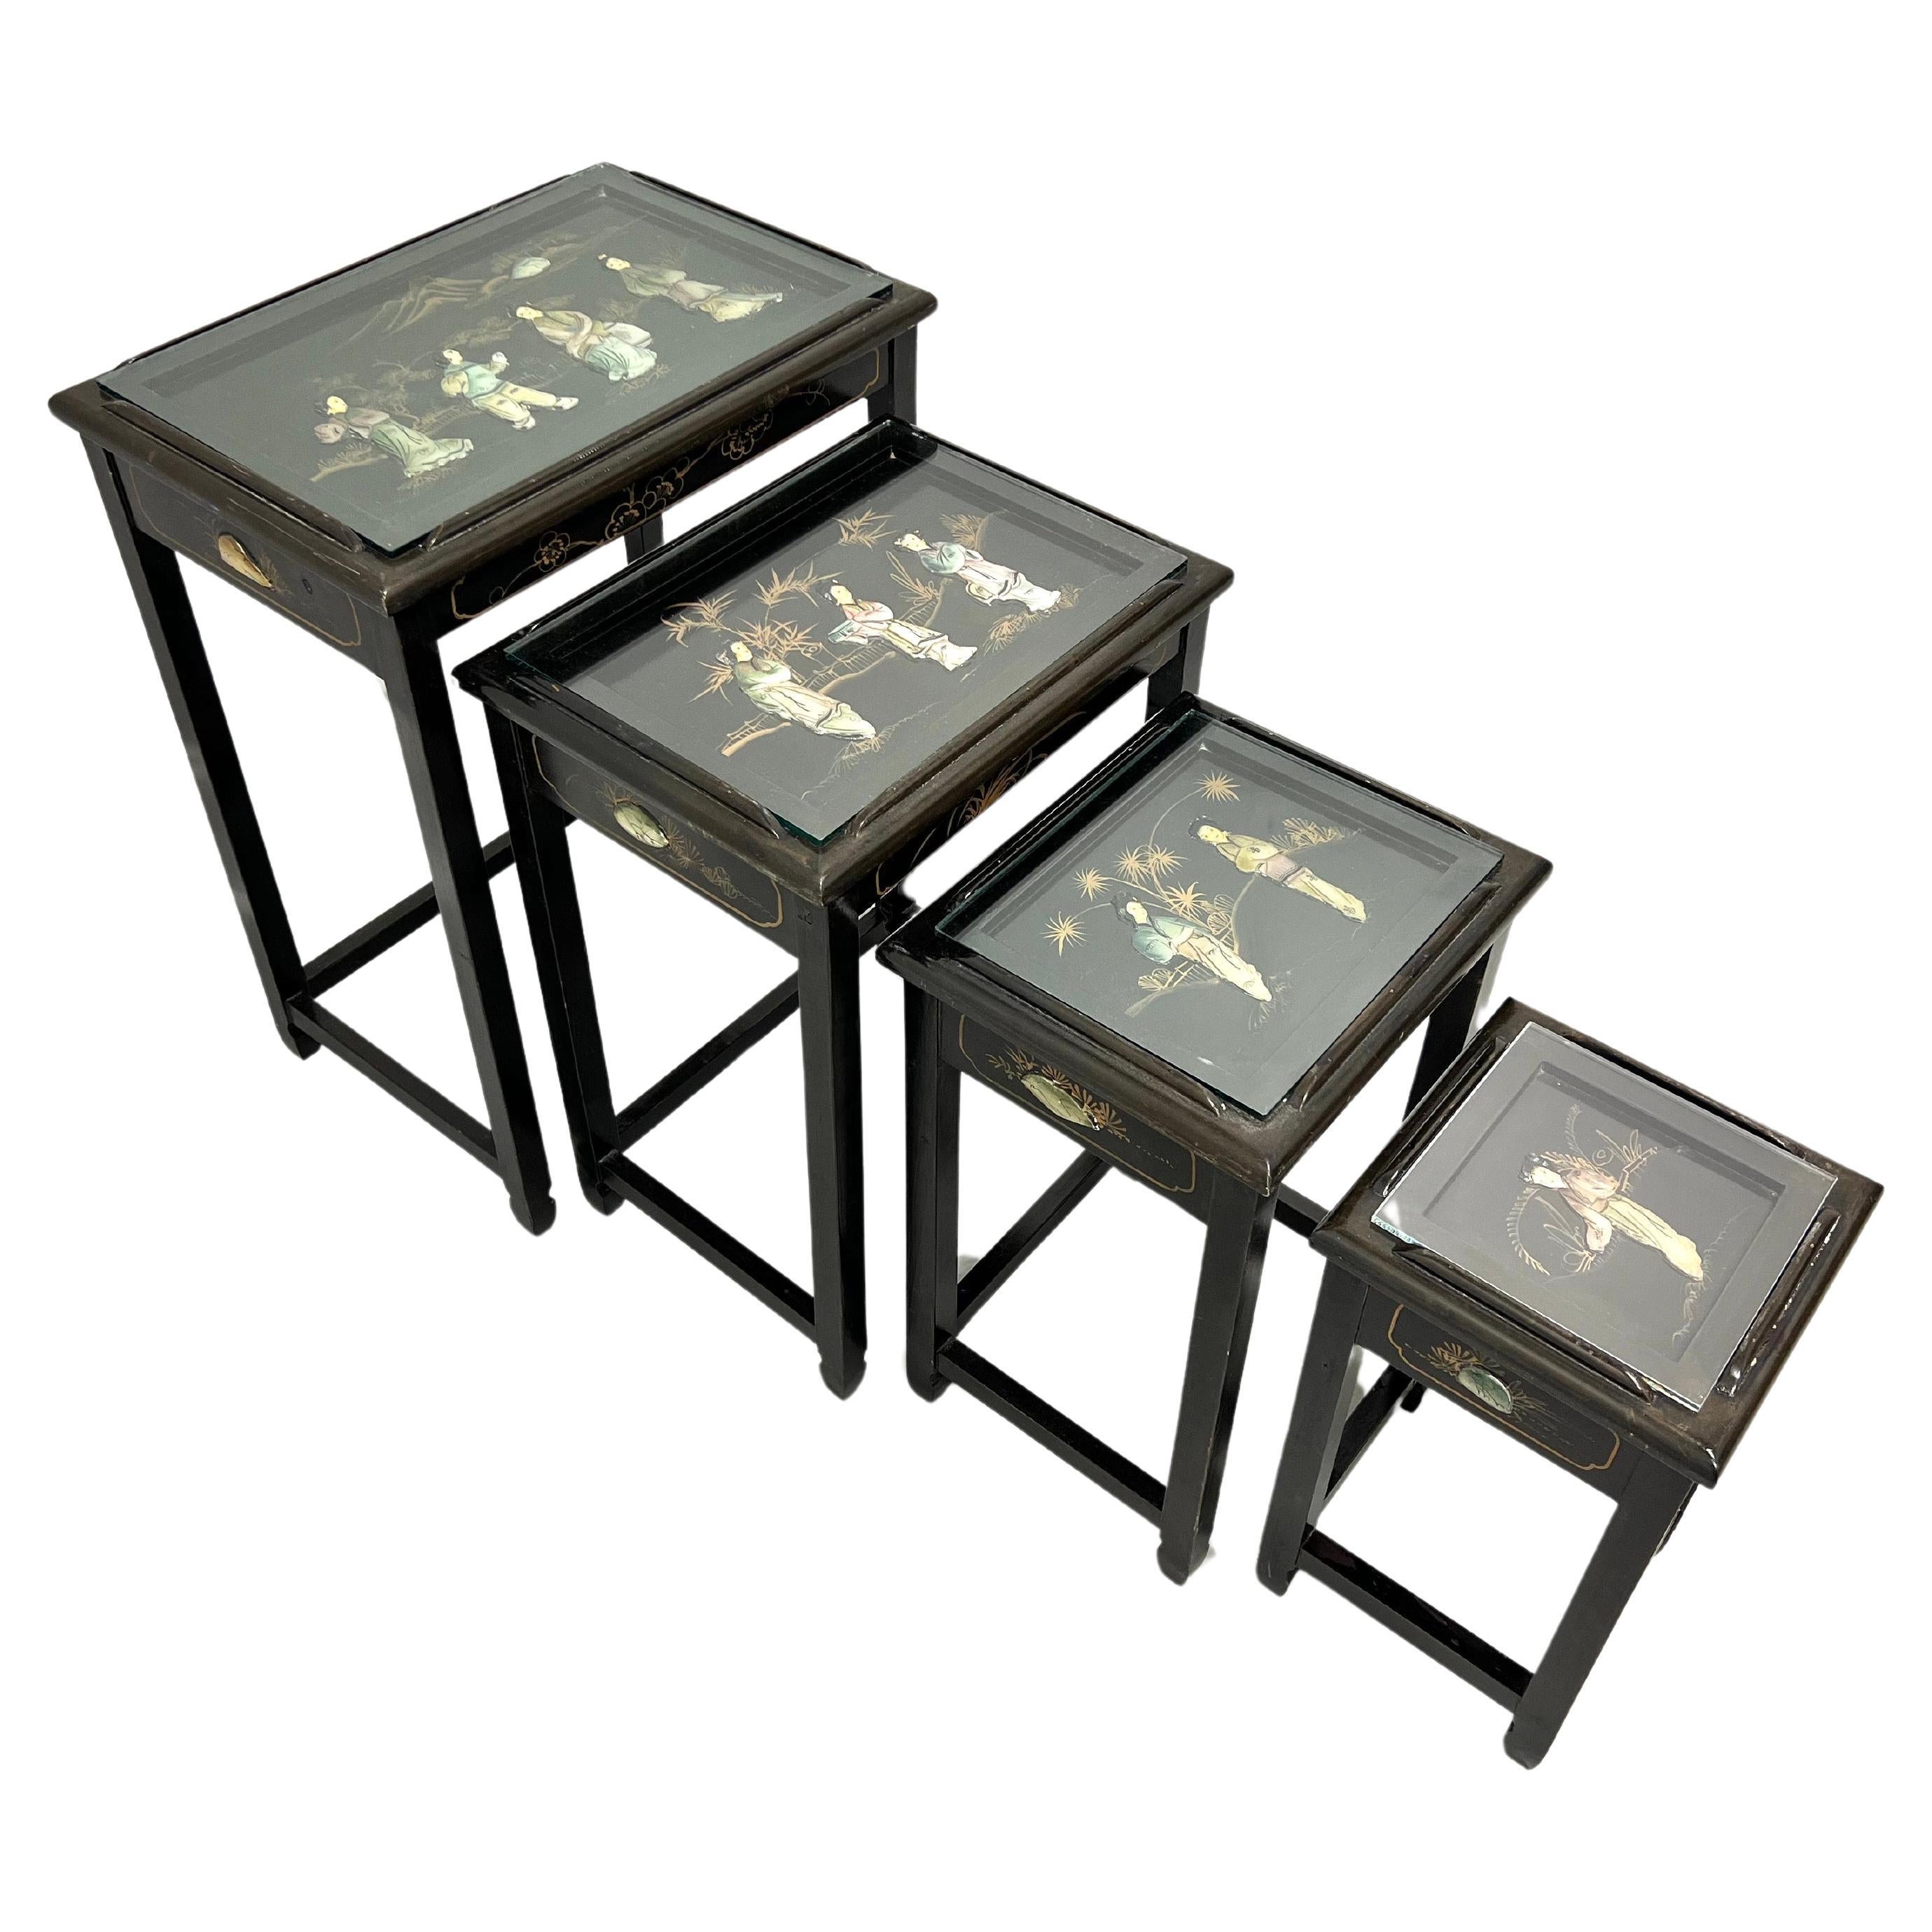 1980's Chinese Export Black Lacquer Hand Painted Nesting Tables - Set of 4